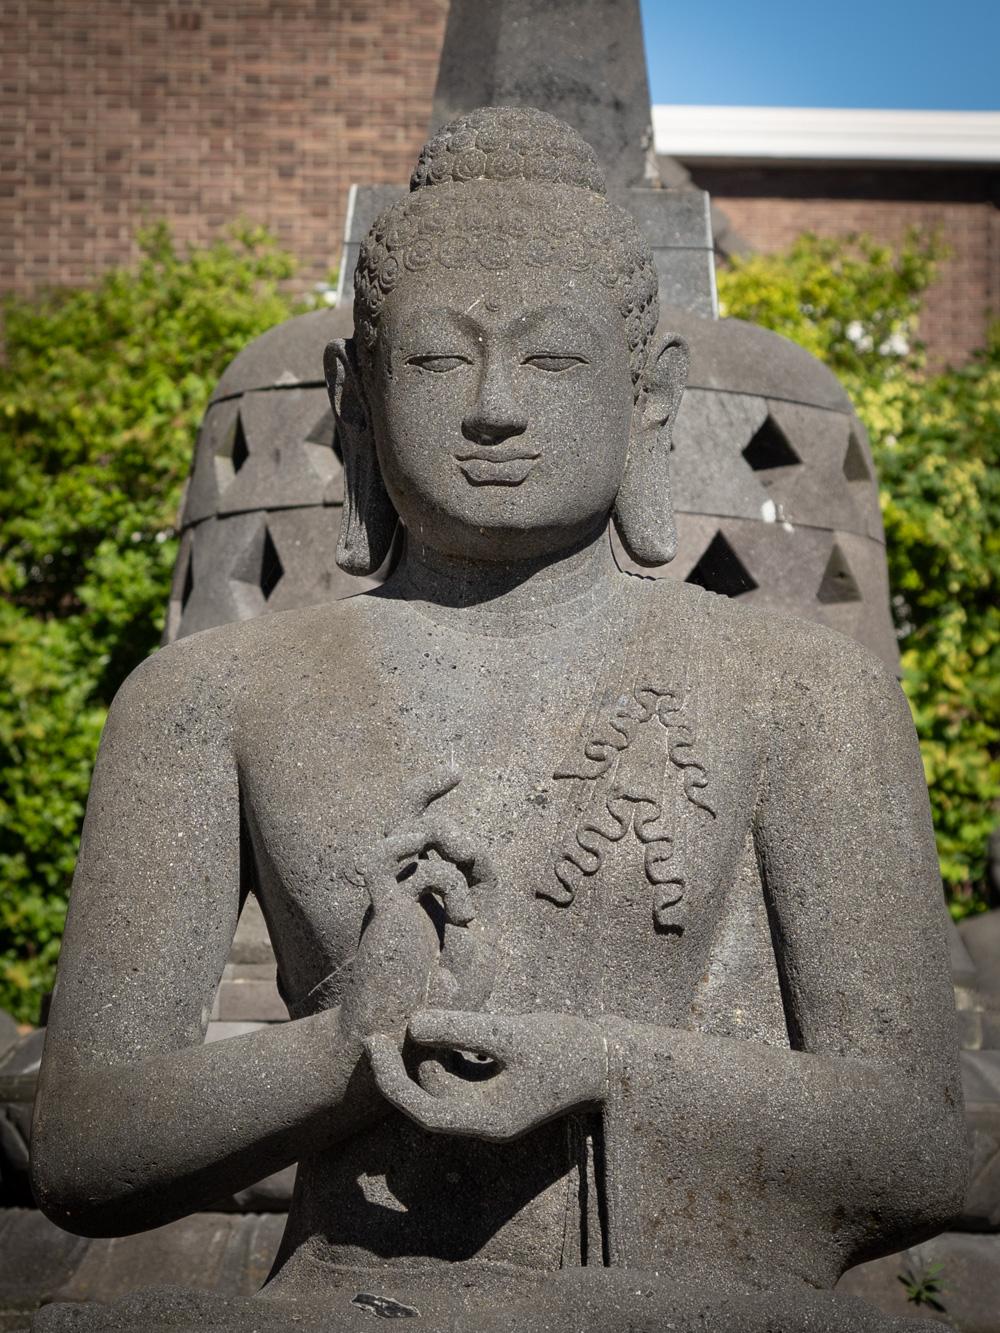 Large lavastone Buddha statue
Material : lavastone
117 cm high
93 cm wide and 67 cm deep
Estimated weight : +/- 350 kg
Dharmachakra mudra
Newly hand carved from a single block of lavastone
Can be shipped worldwide
Originating from Indonesia
Nr: